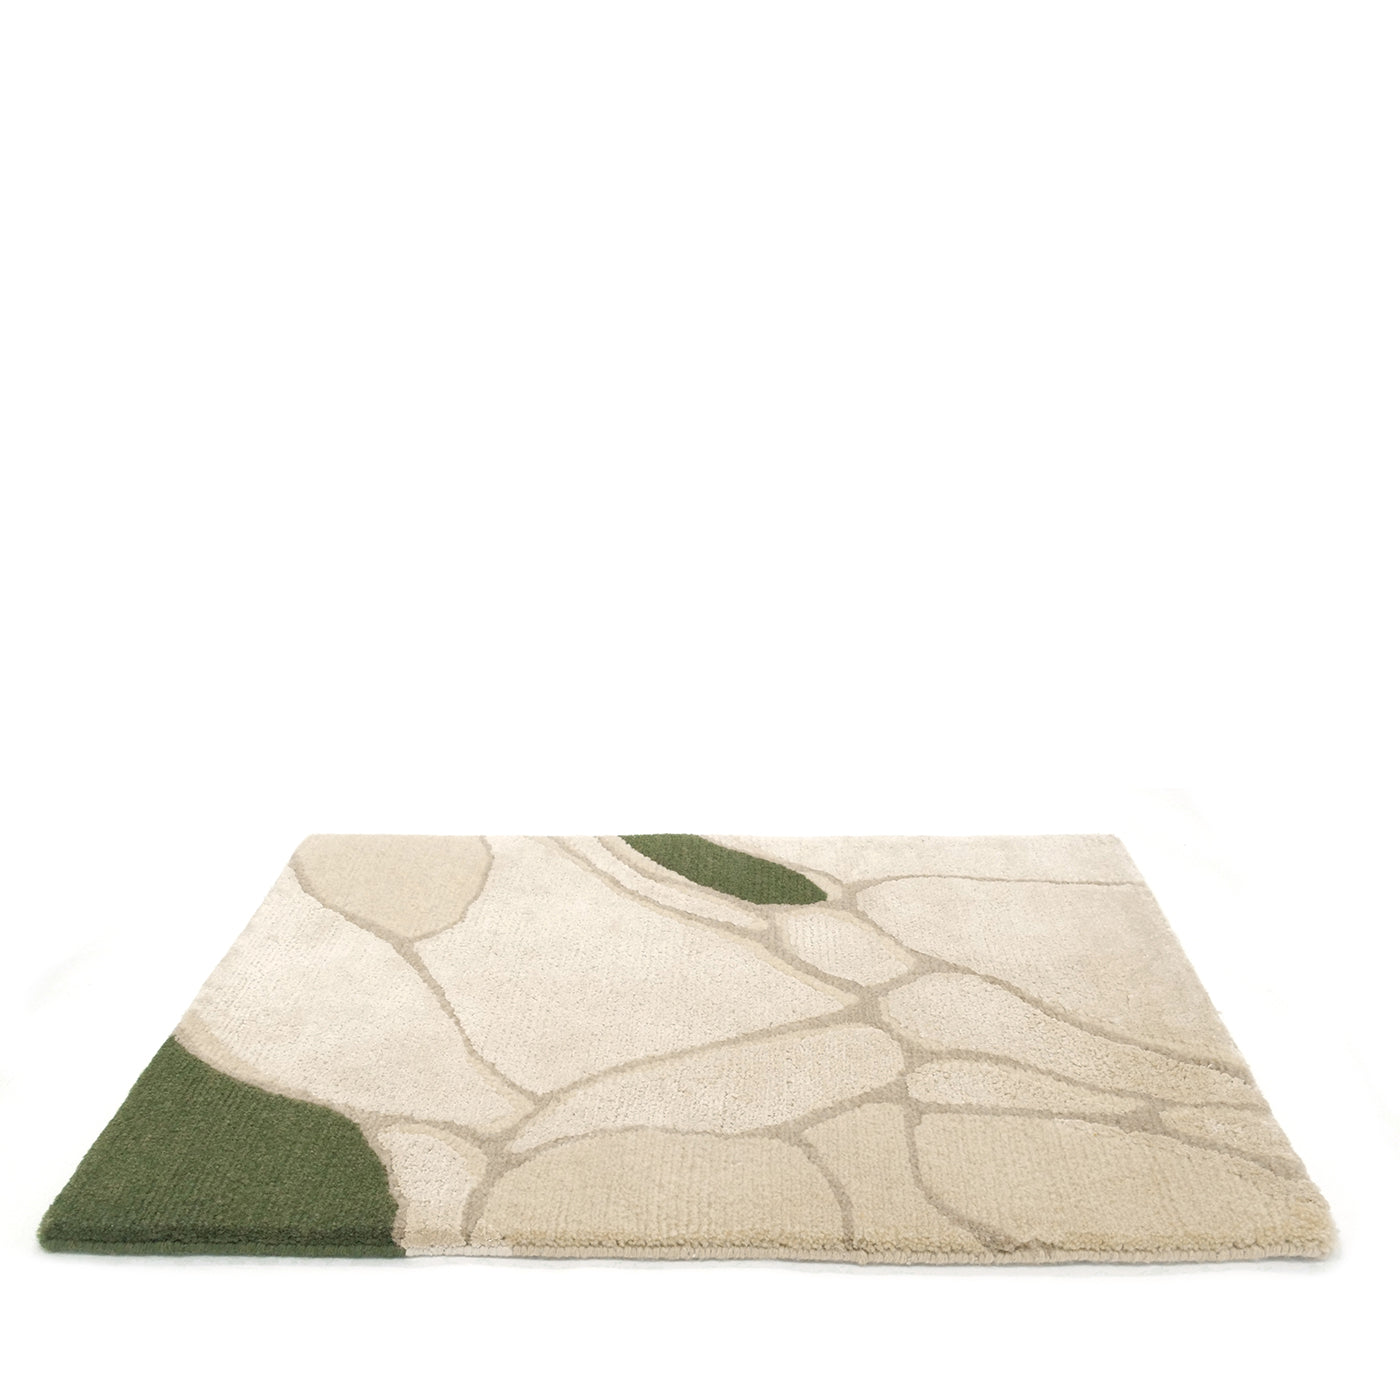 Narcissus Rug - Alternative view 4